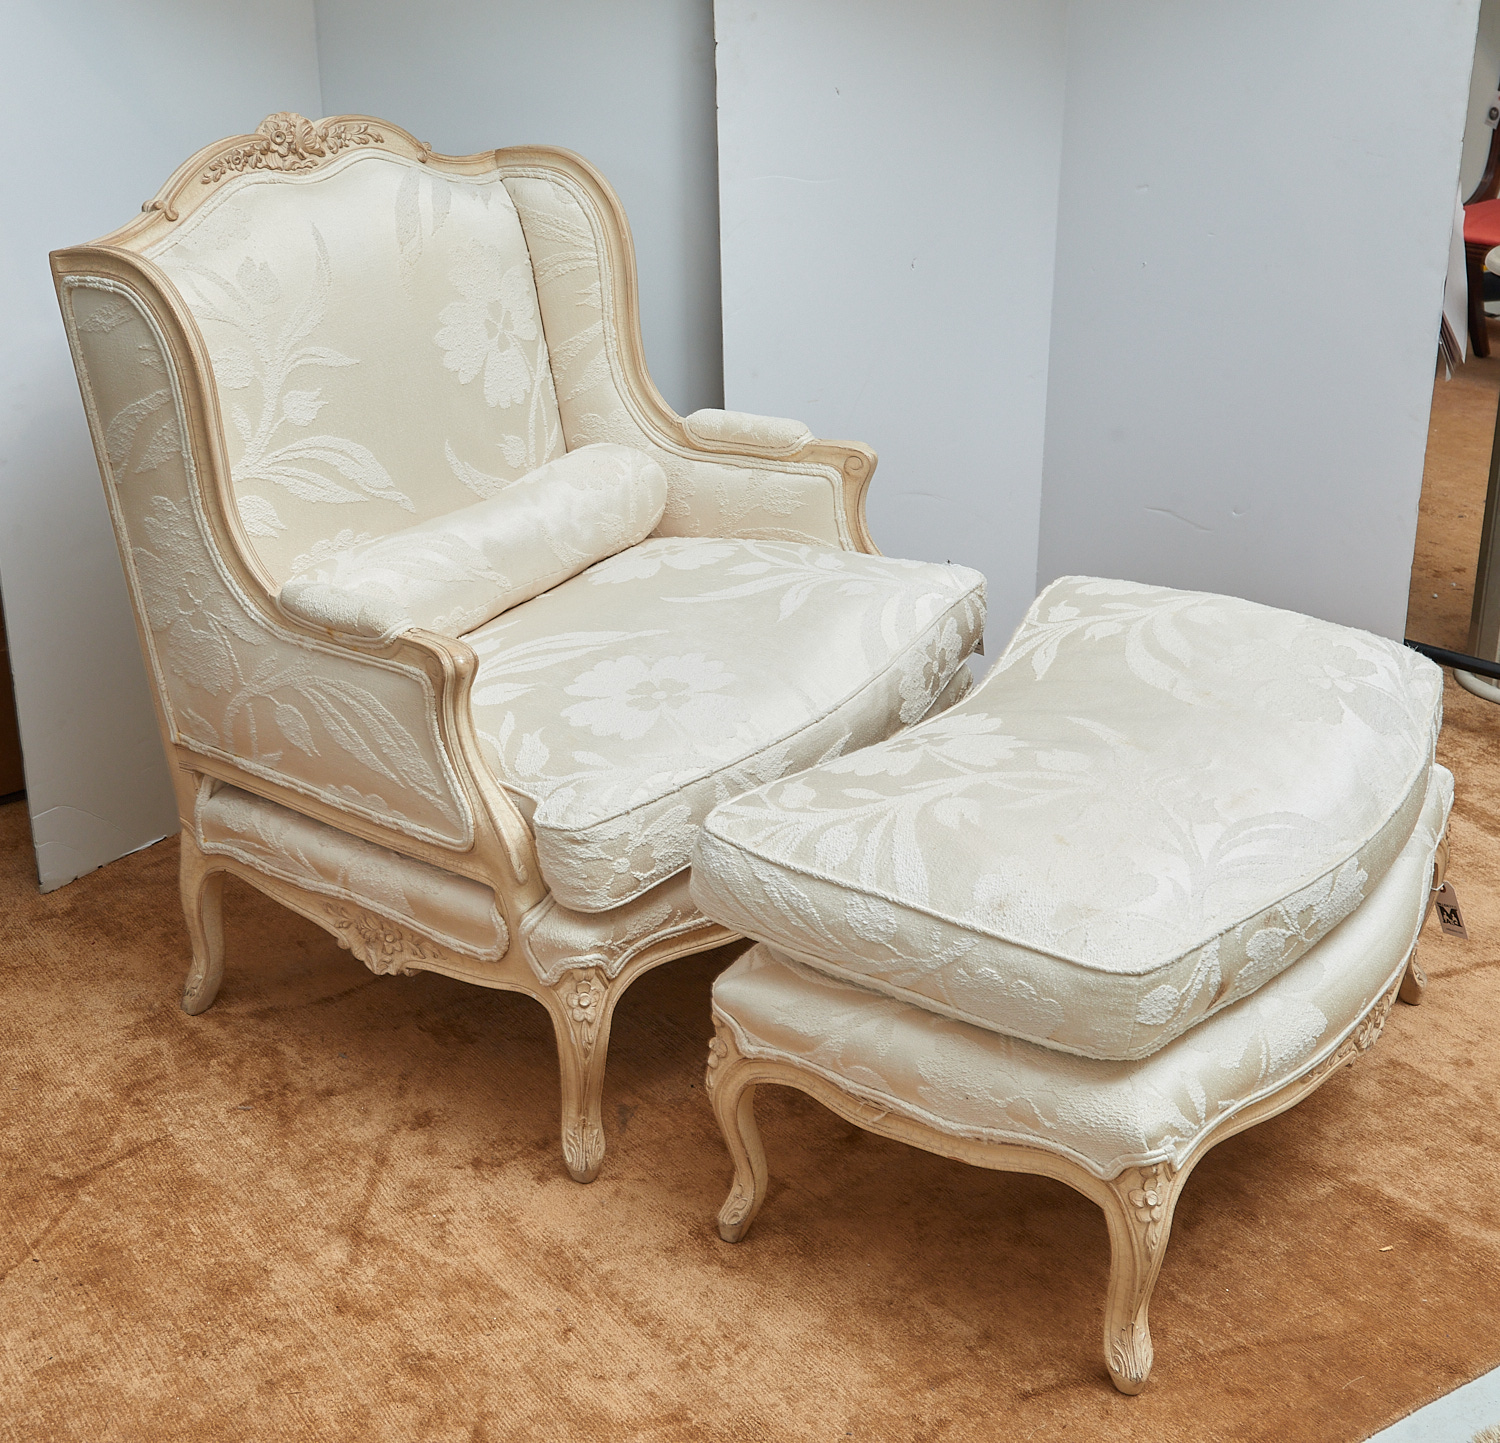 AUFFRAY CO MARQUISE CHAIR AND 362228